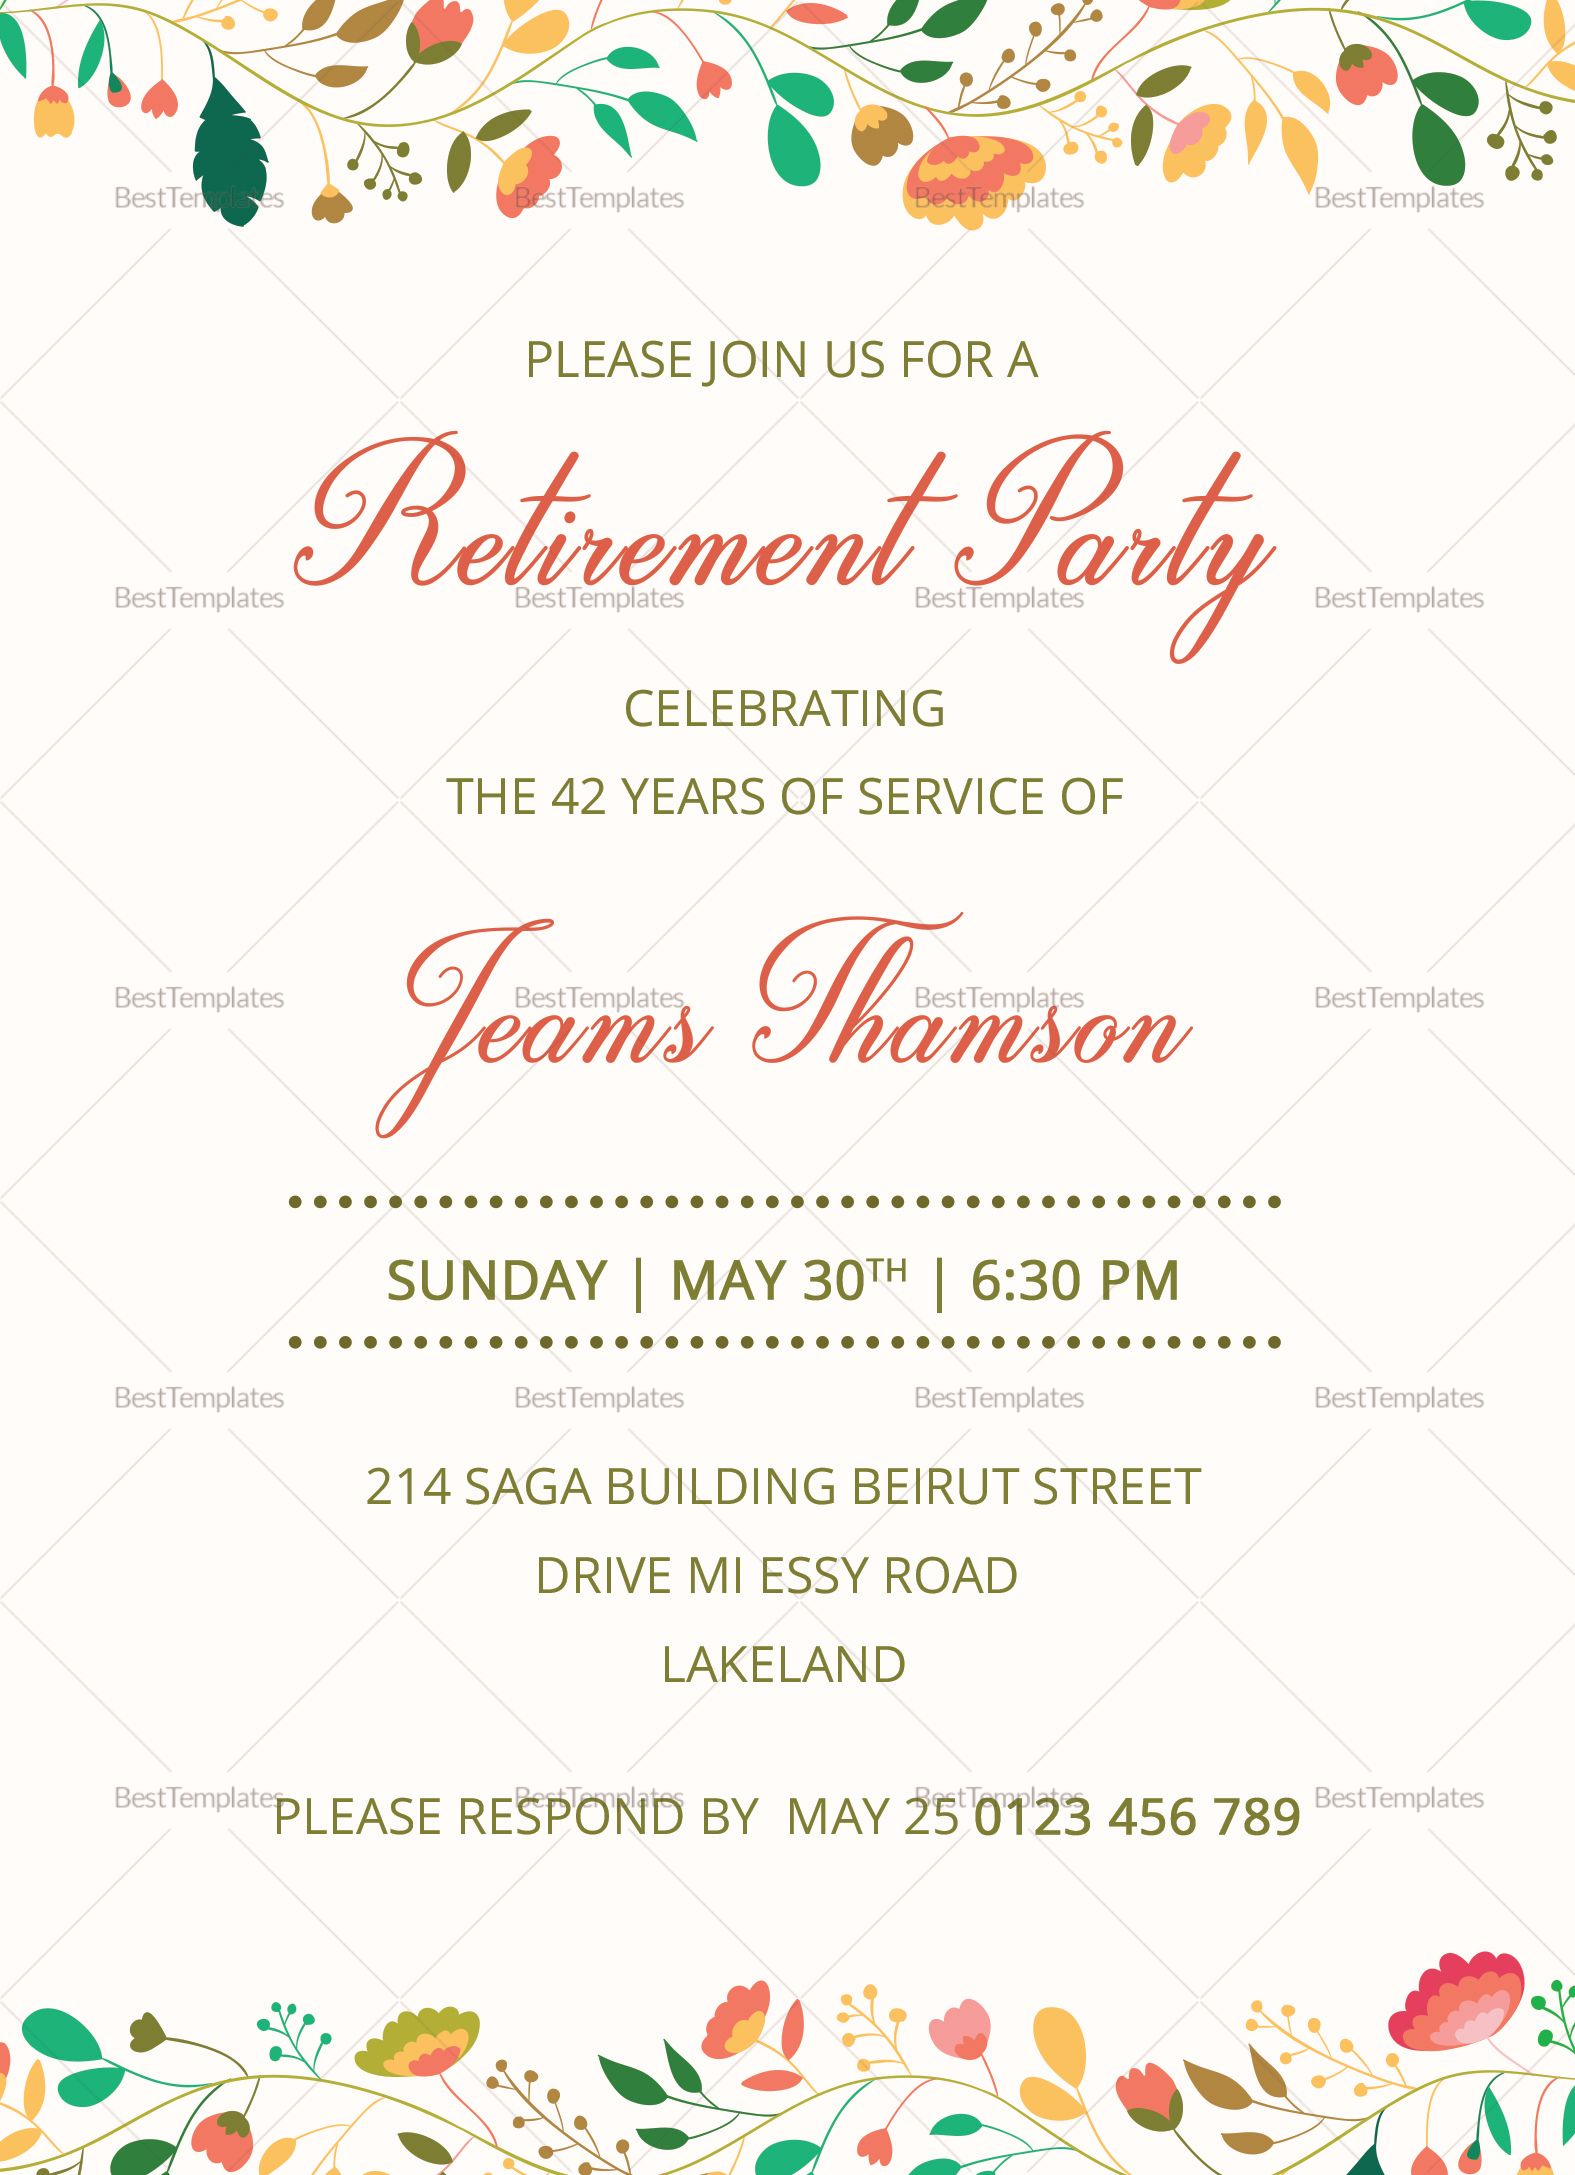 Pinm Haseem On Download | Retirement Party Invitations Pertaining To Retirement Card Template